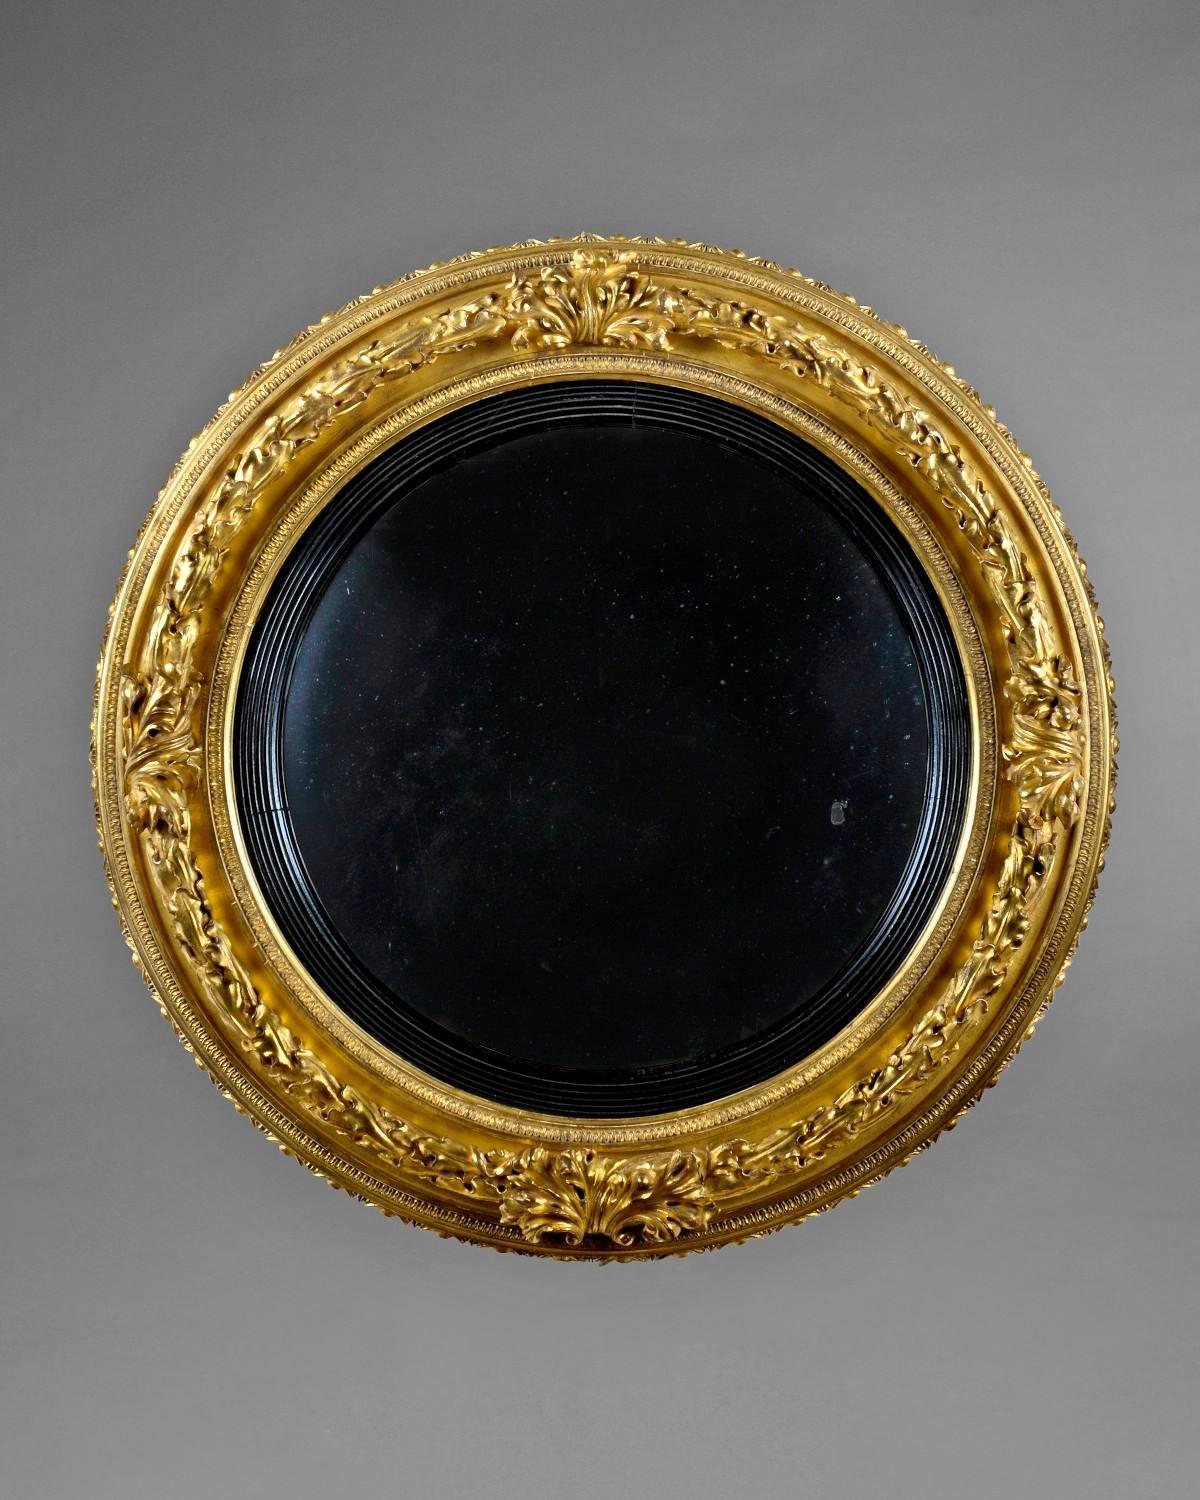 An elegant Regency period gilded convex mirror, profusely carved with acanthus and egg and dart decoration with a inset ebony moulding.
 